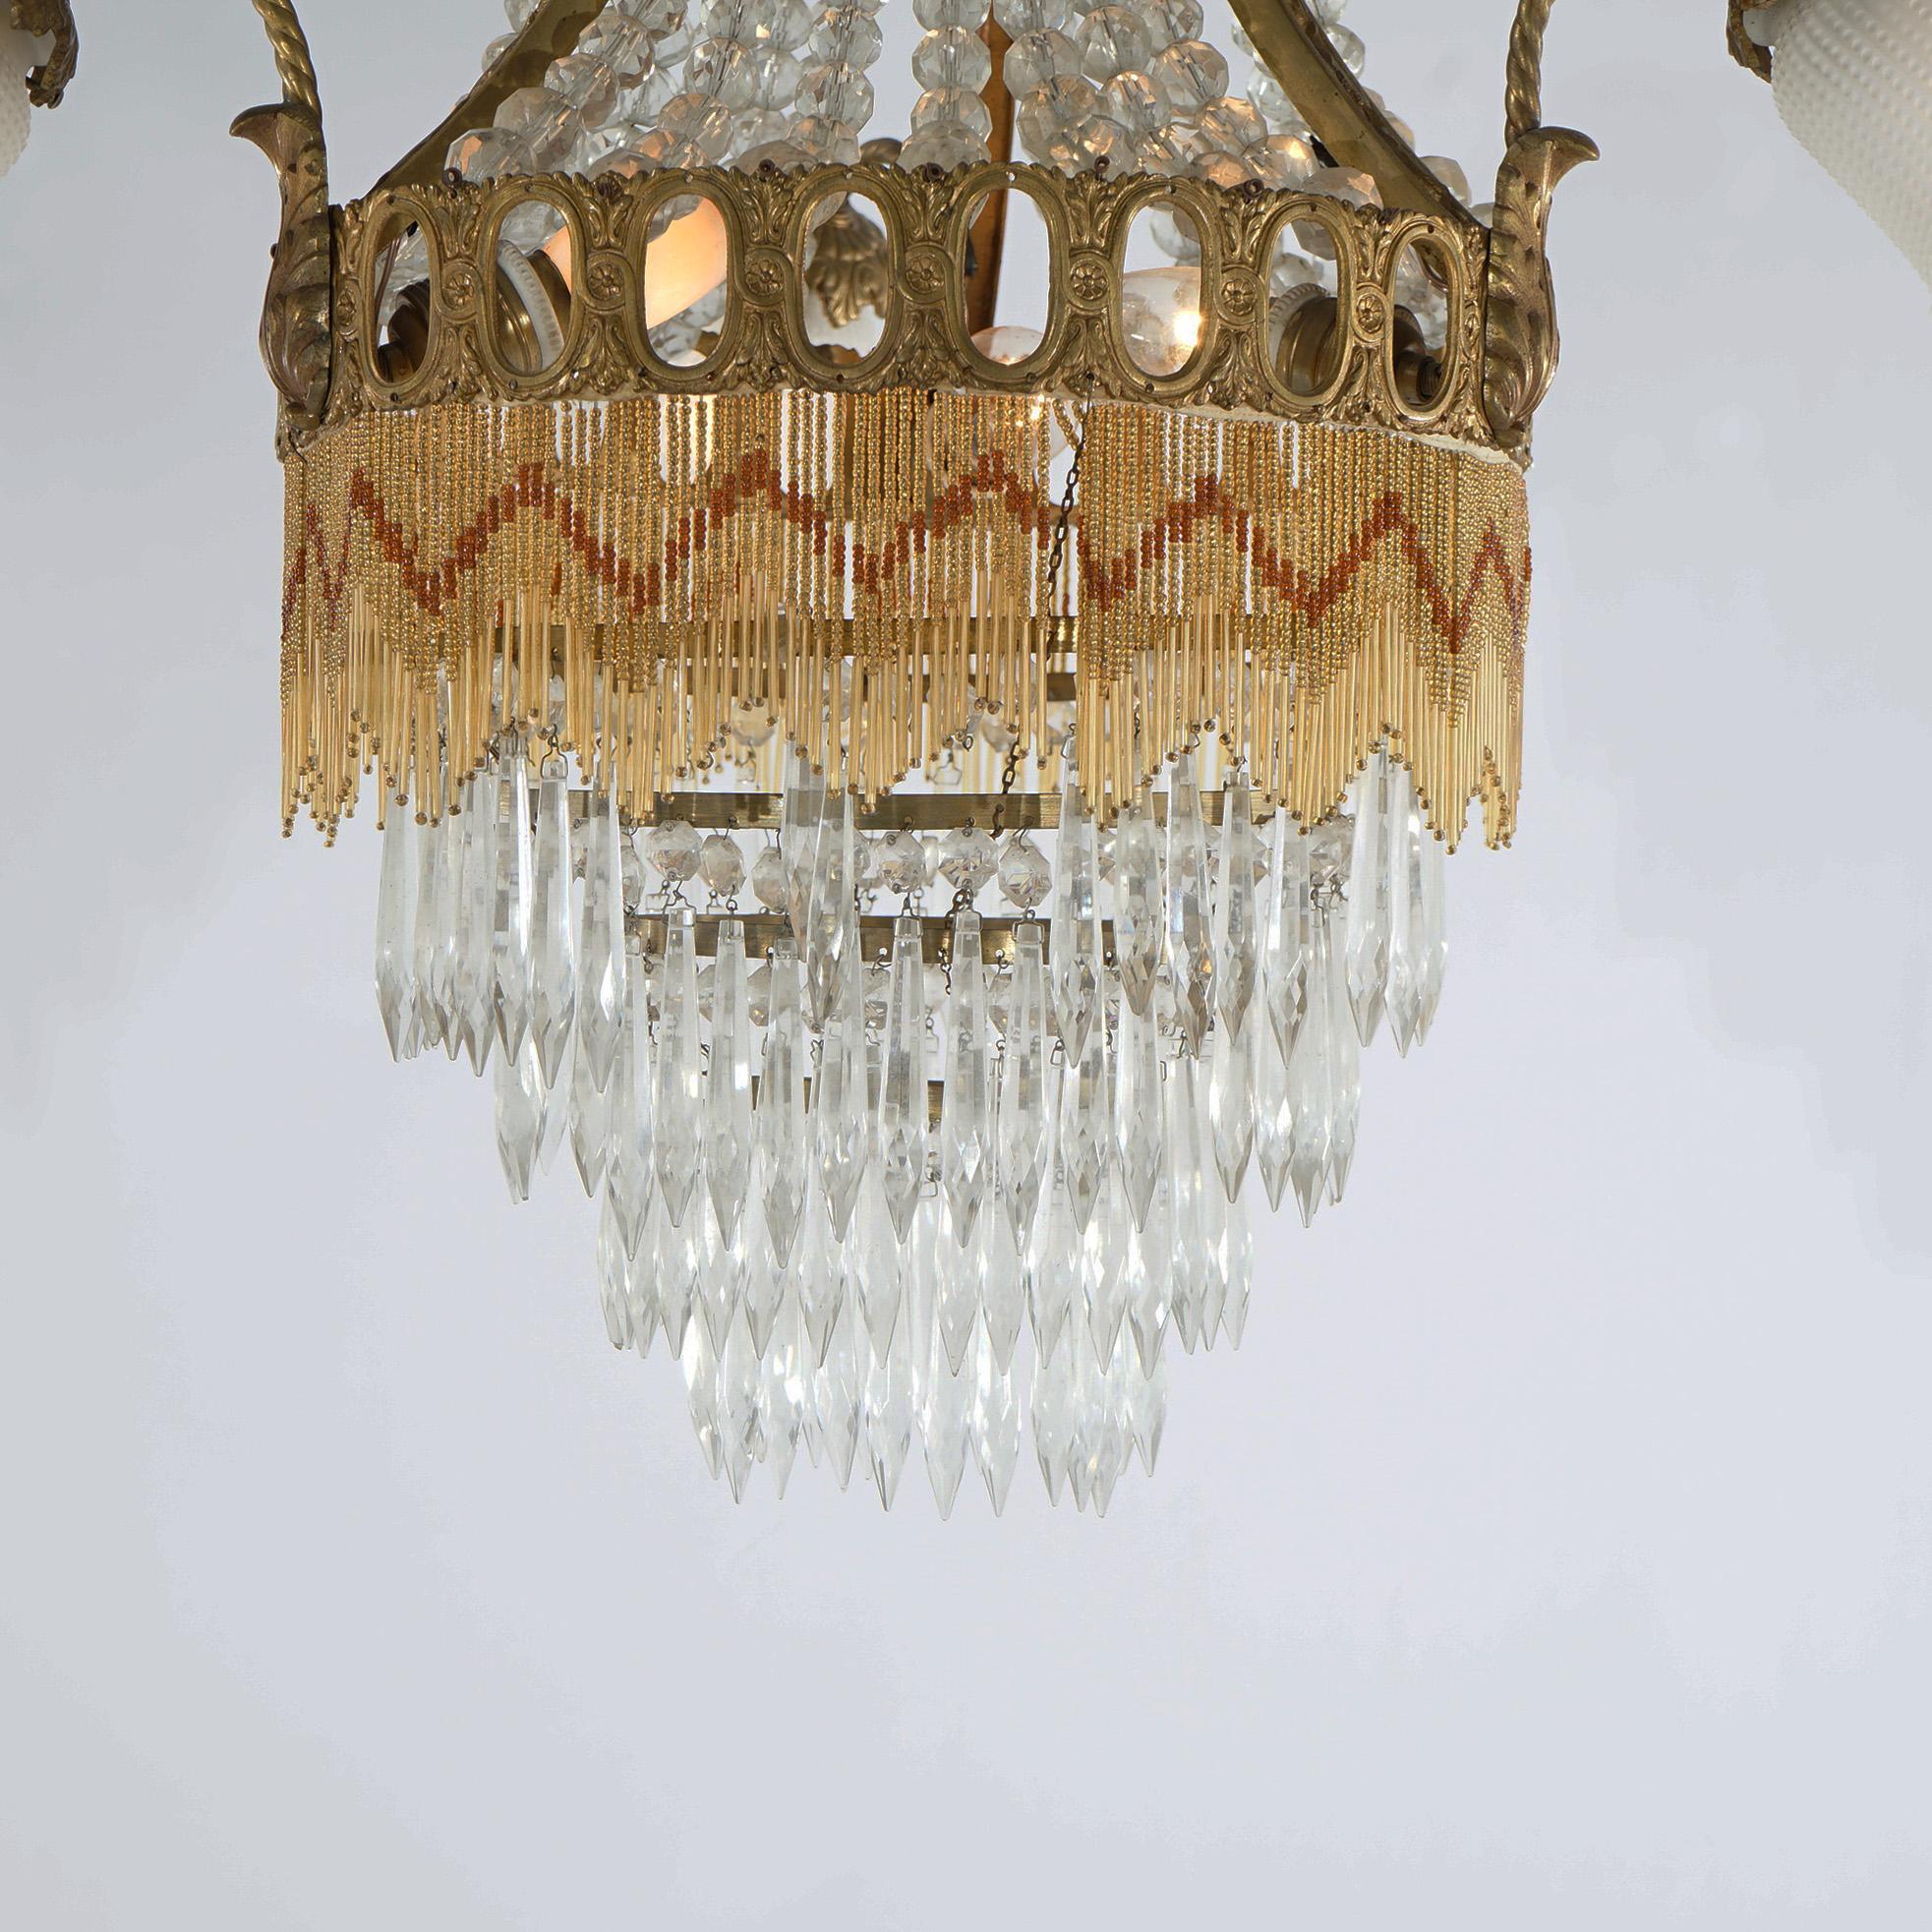 Antique French Louis XIV Gilt Bronze, Crystal & Beaded 6 Light Chandelier c1920 For Sale 4